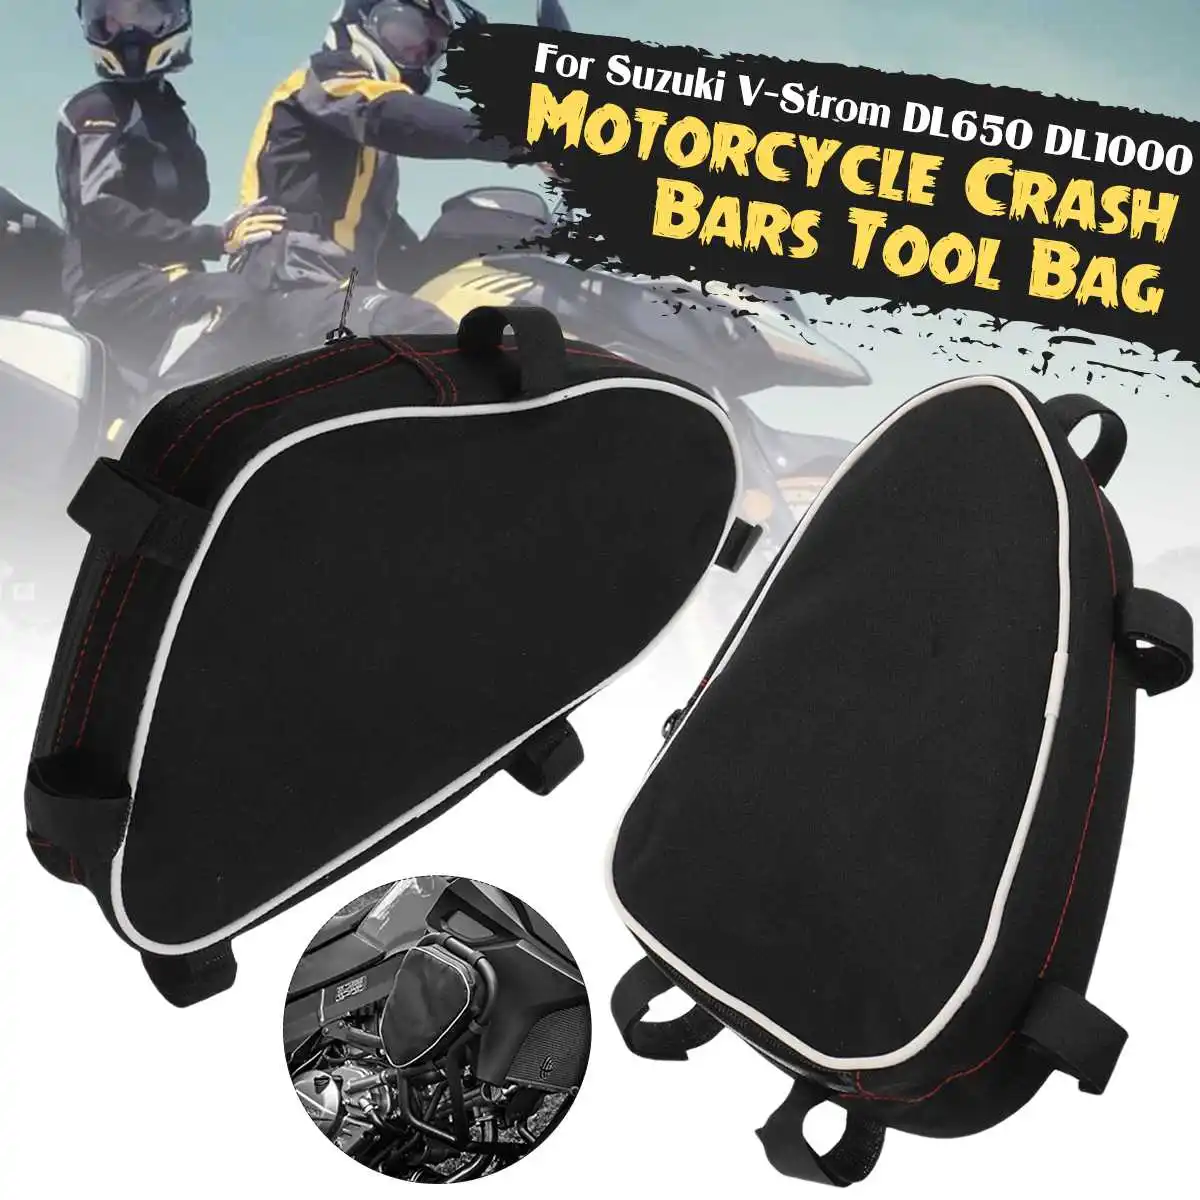 

For Suzuki V-Strom DL650 DL1000 For Givi For Kappa 2PCS Motorcycle Frame Crash Bars Waterproof Bag Repair Tool Placement Bag